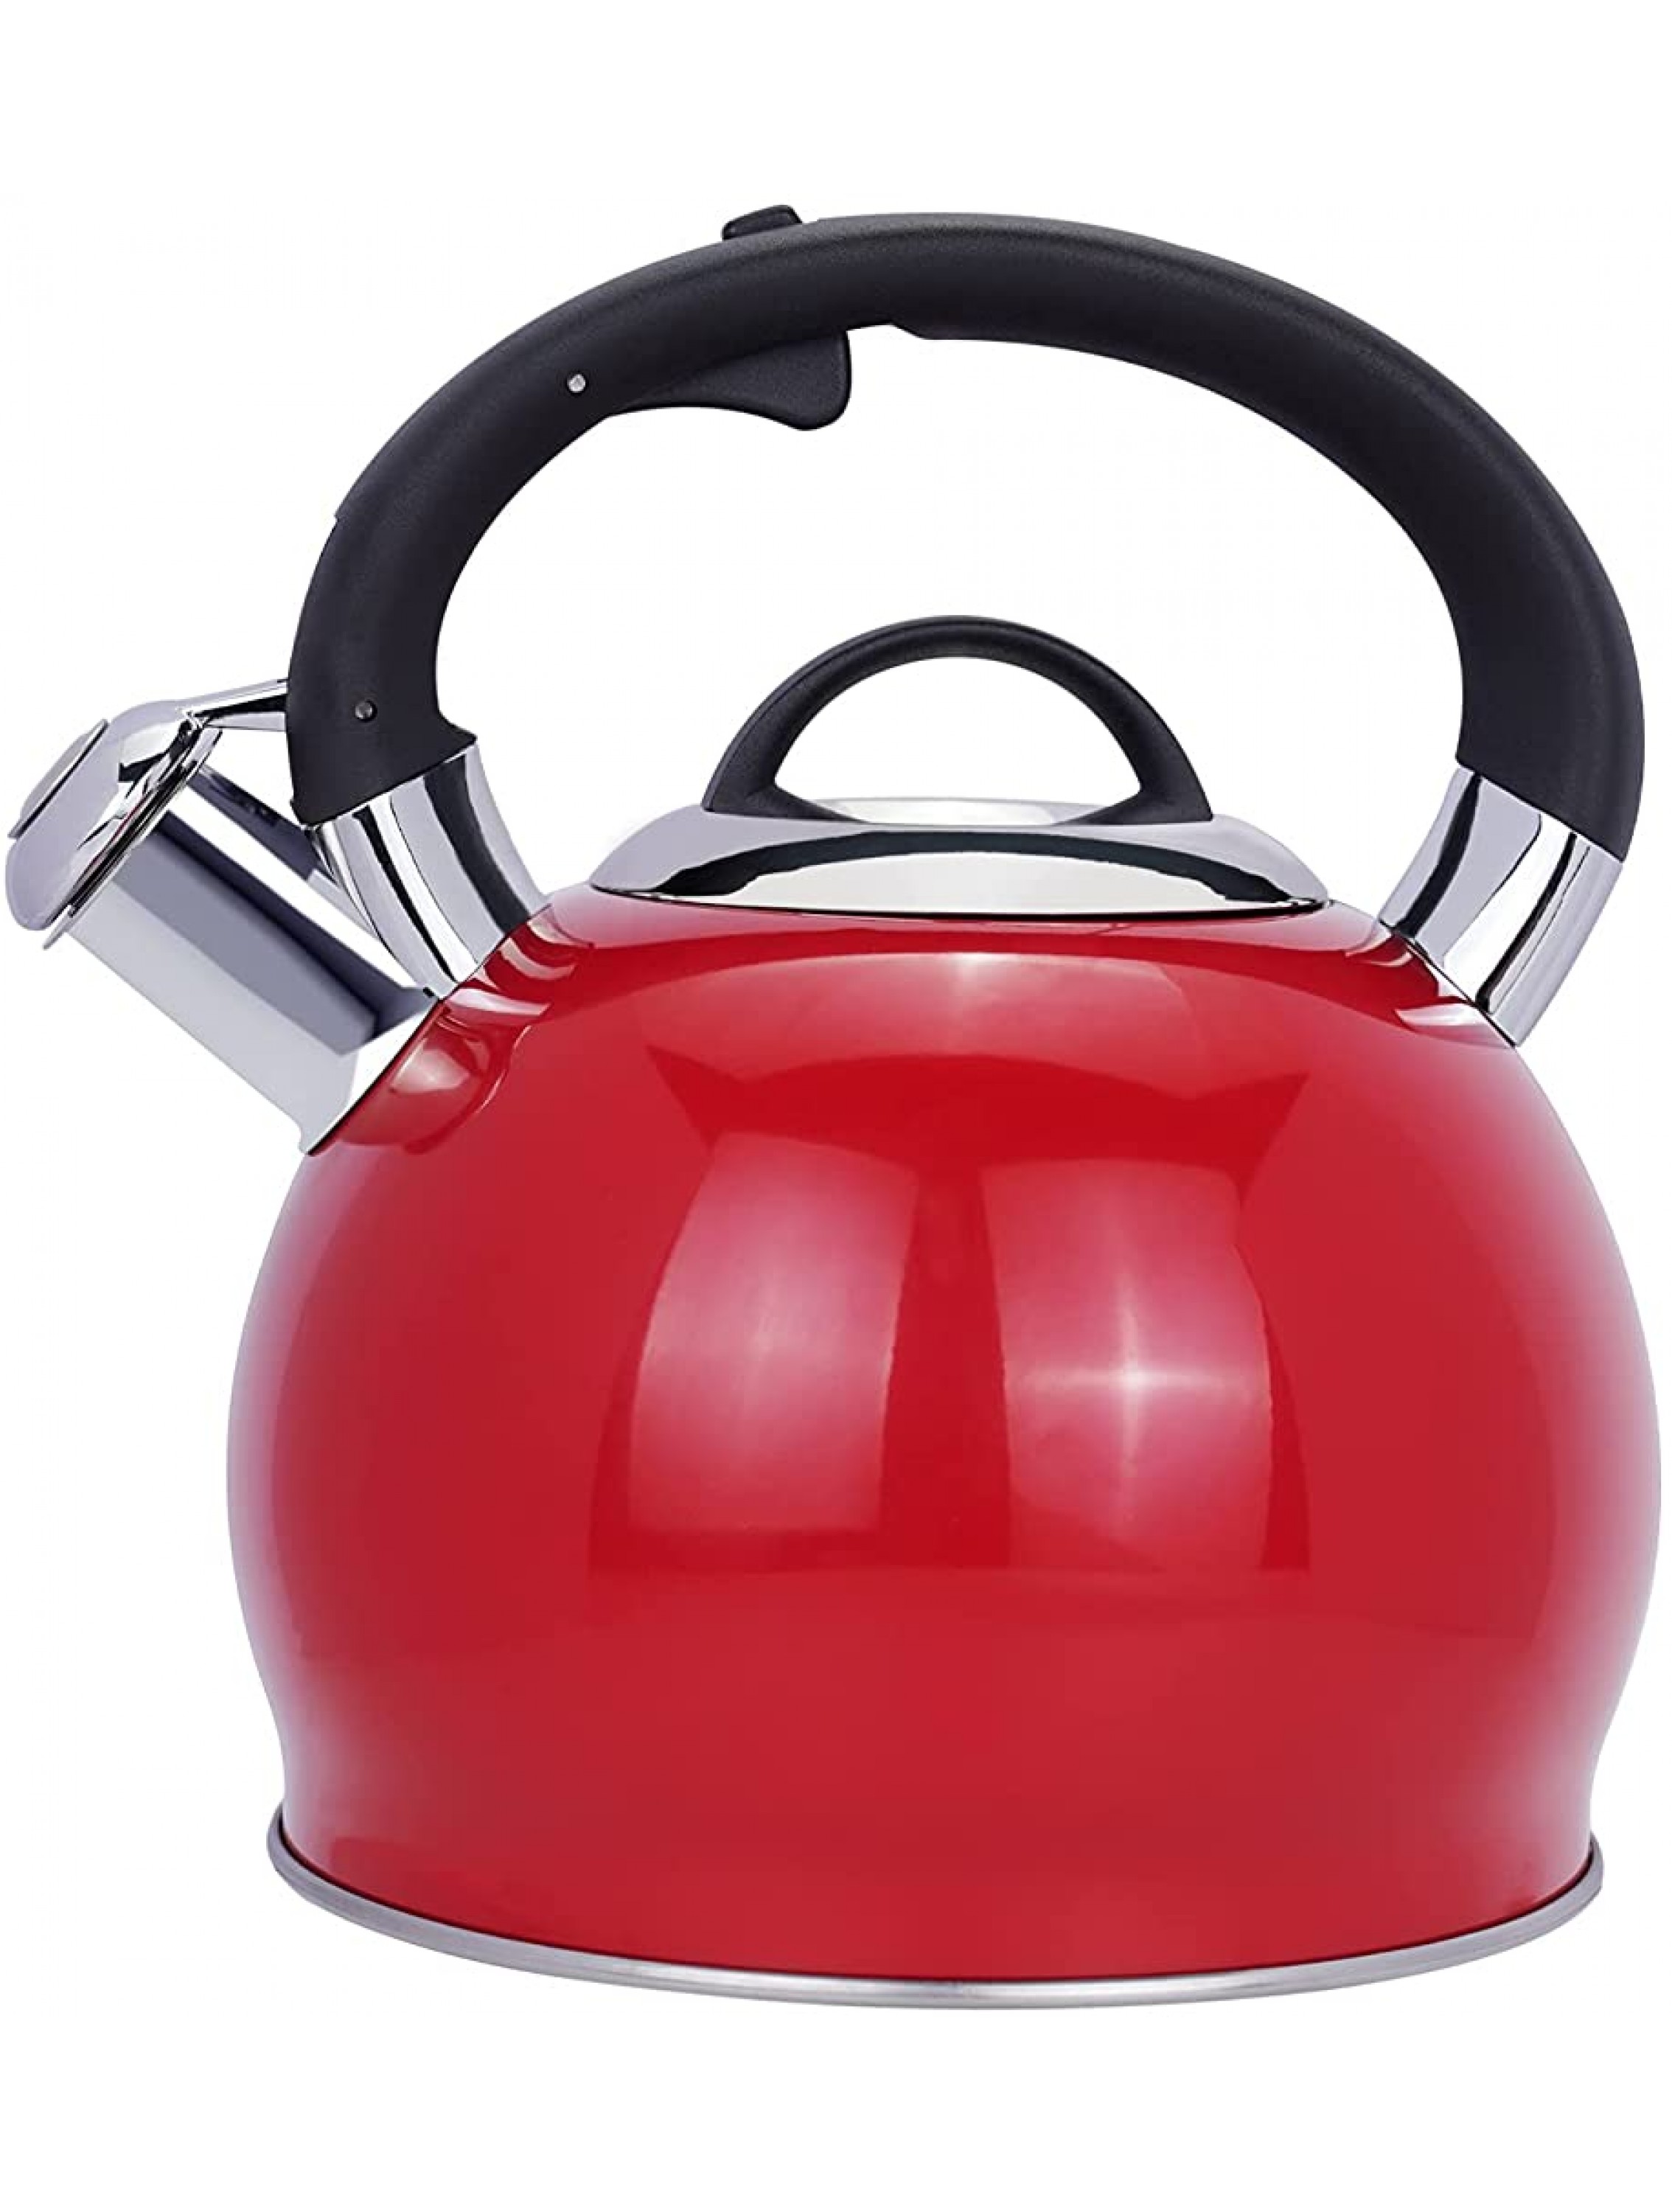 Masio 2.4 Quart Red Whistling Tea Kettle for Stove Top Food Grade Stainless Steel - B9SRAWBU2